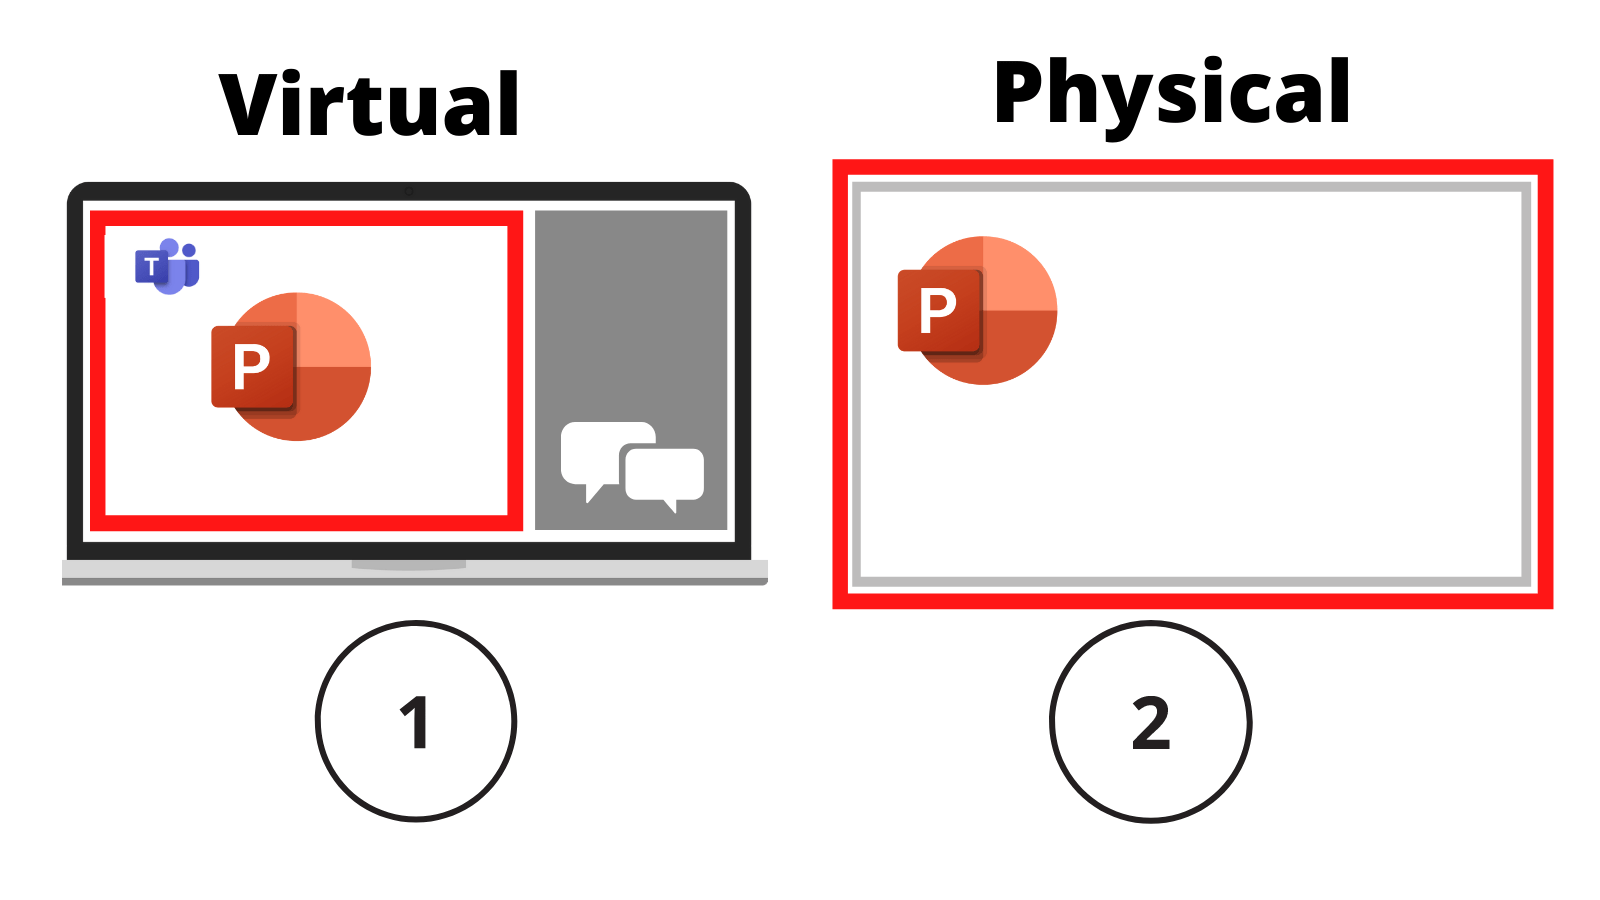 Two screens, one labelled '1, virtual' showing PowerPoint and Teams, the other labelled '2, physical' showing full screen PowerPoint.